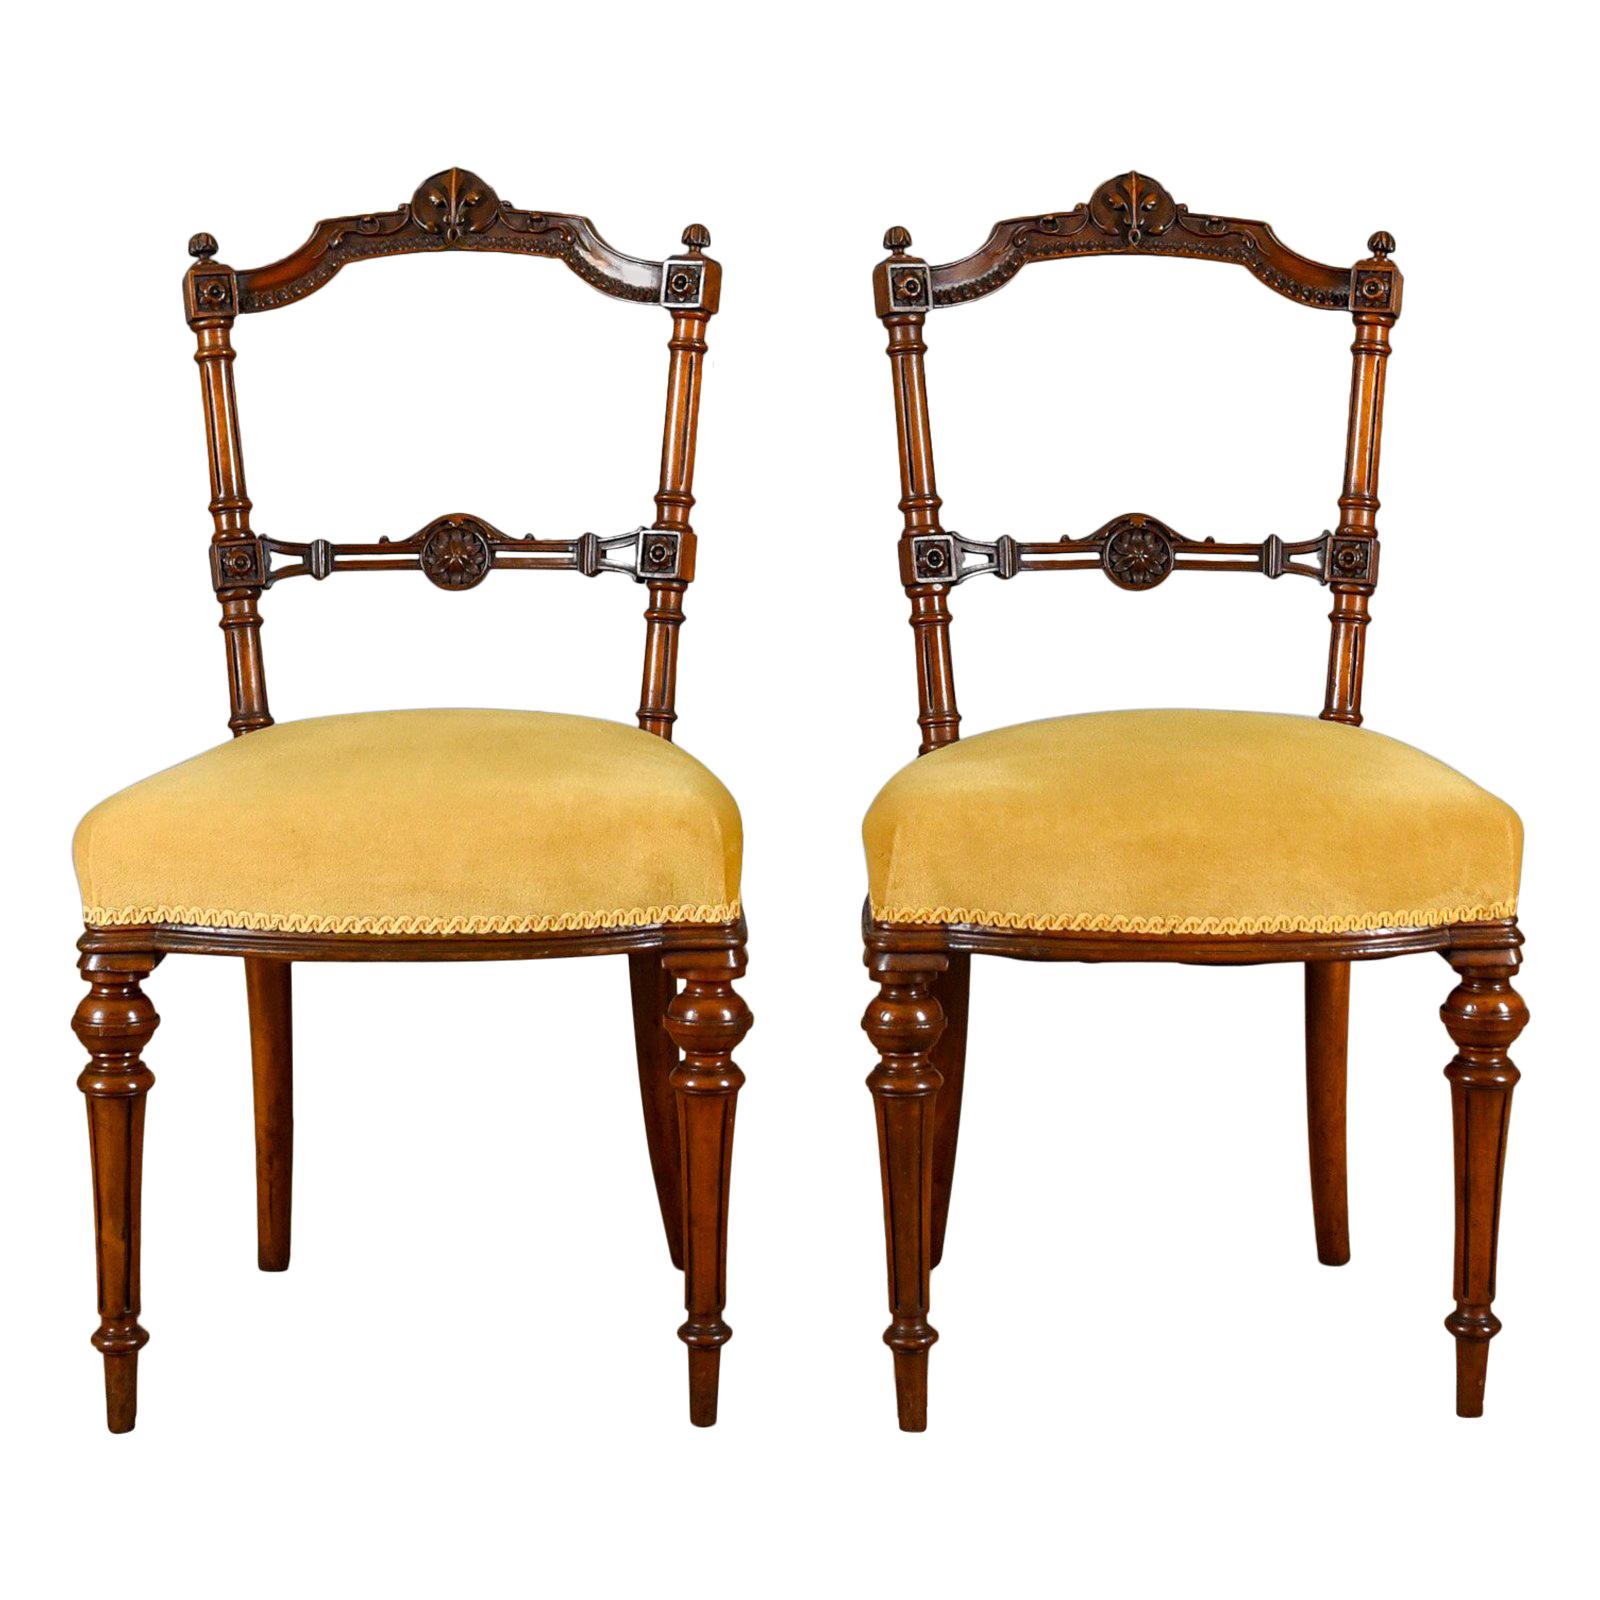 Pair of Antique Chairs, English, Walnut, Aesthetic Period, circa 1880